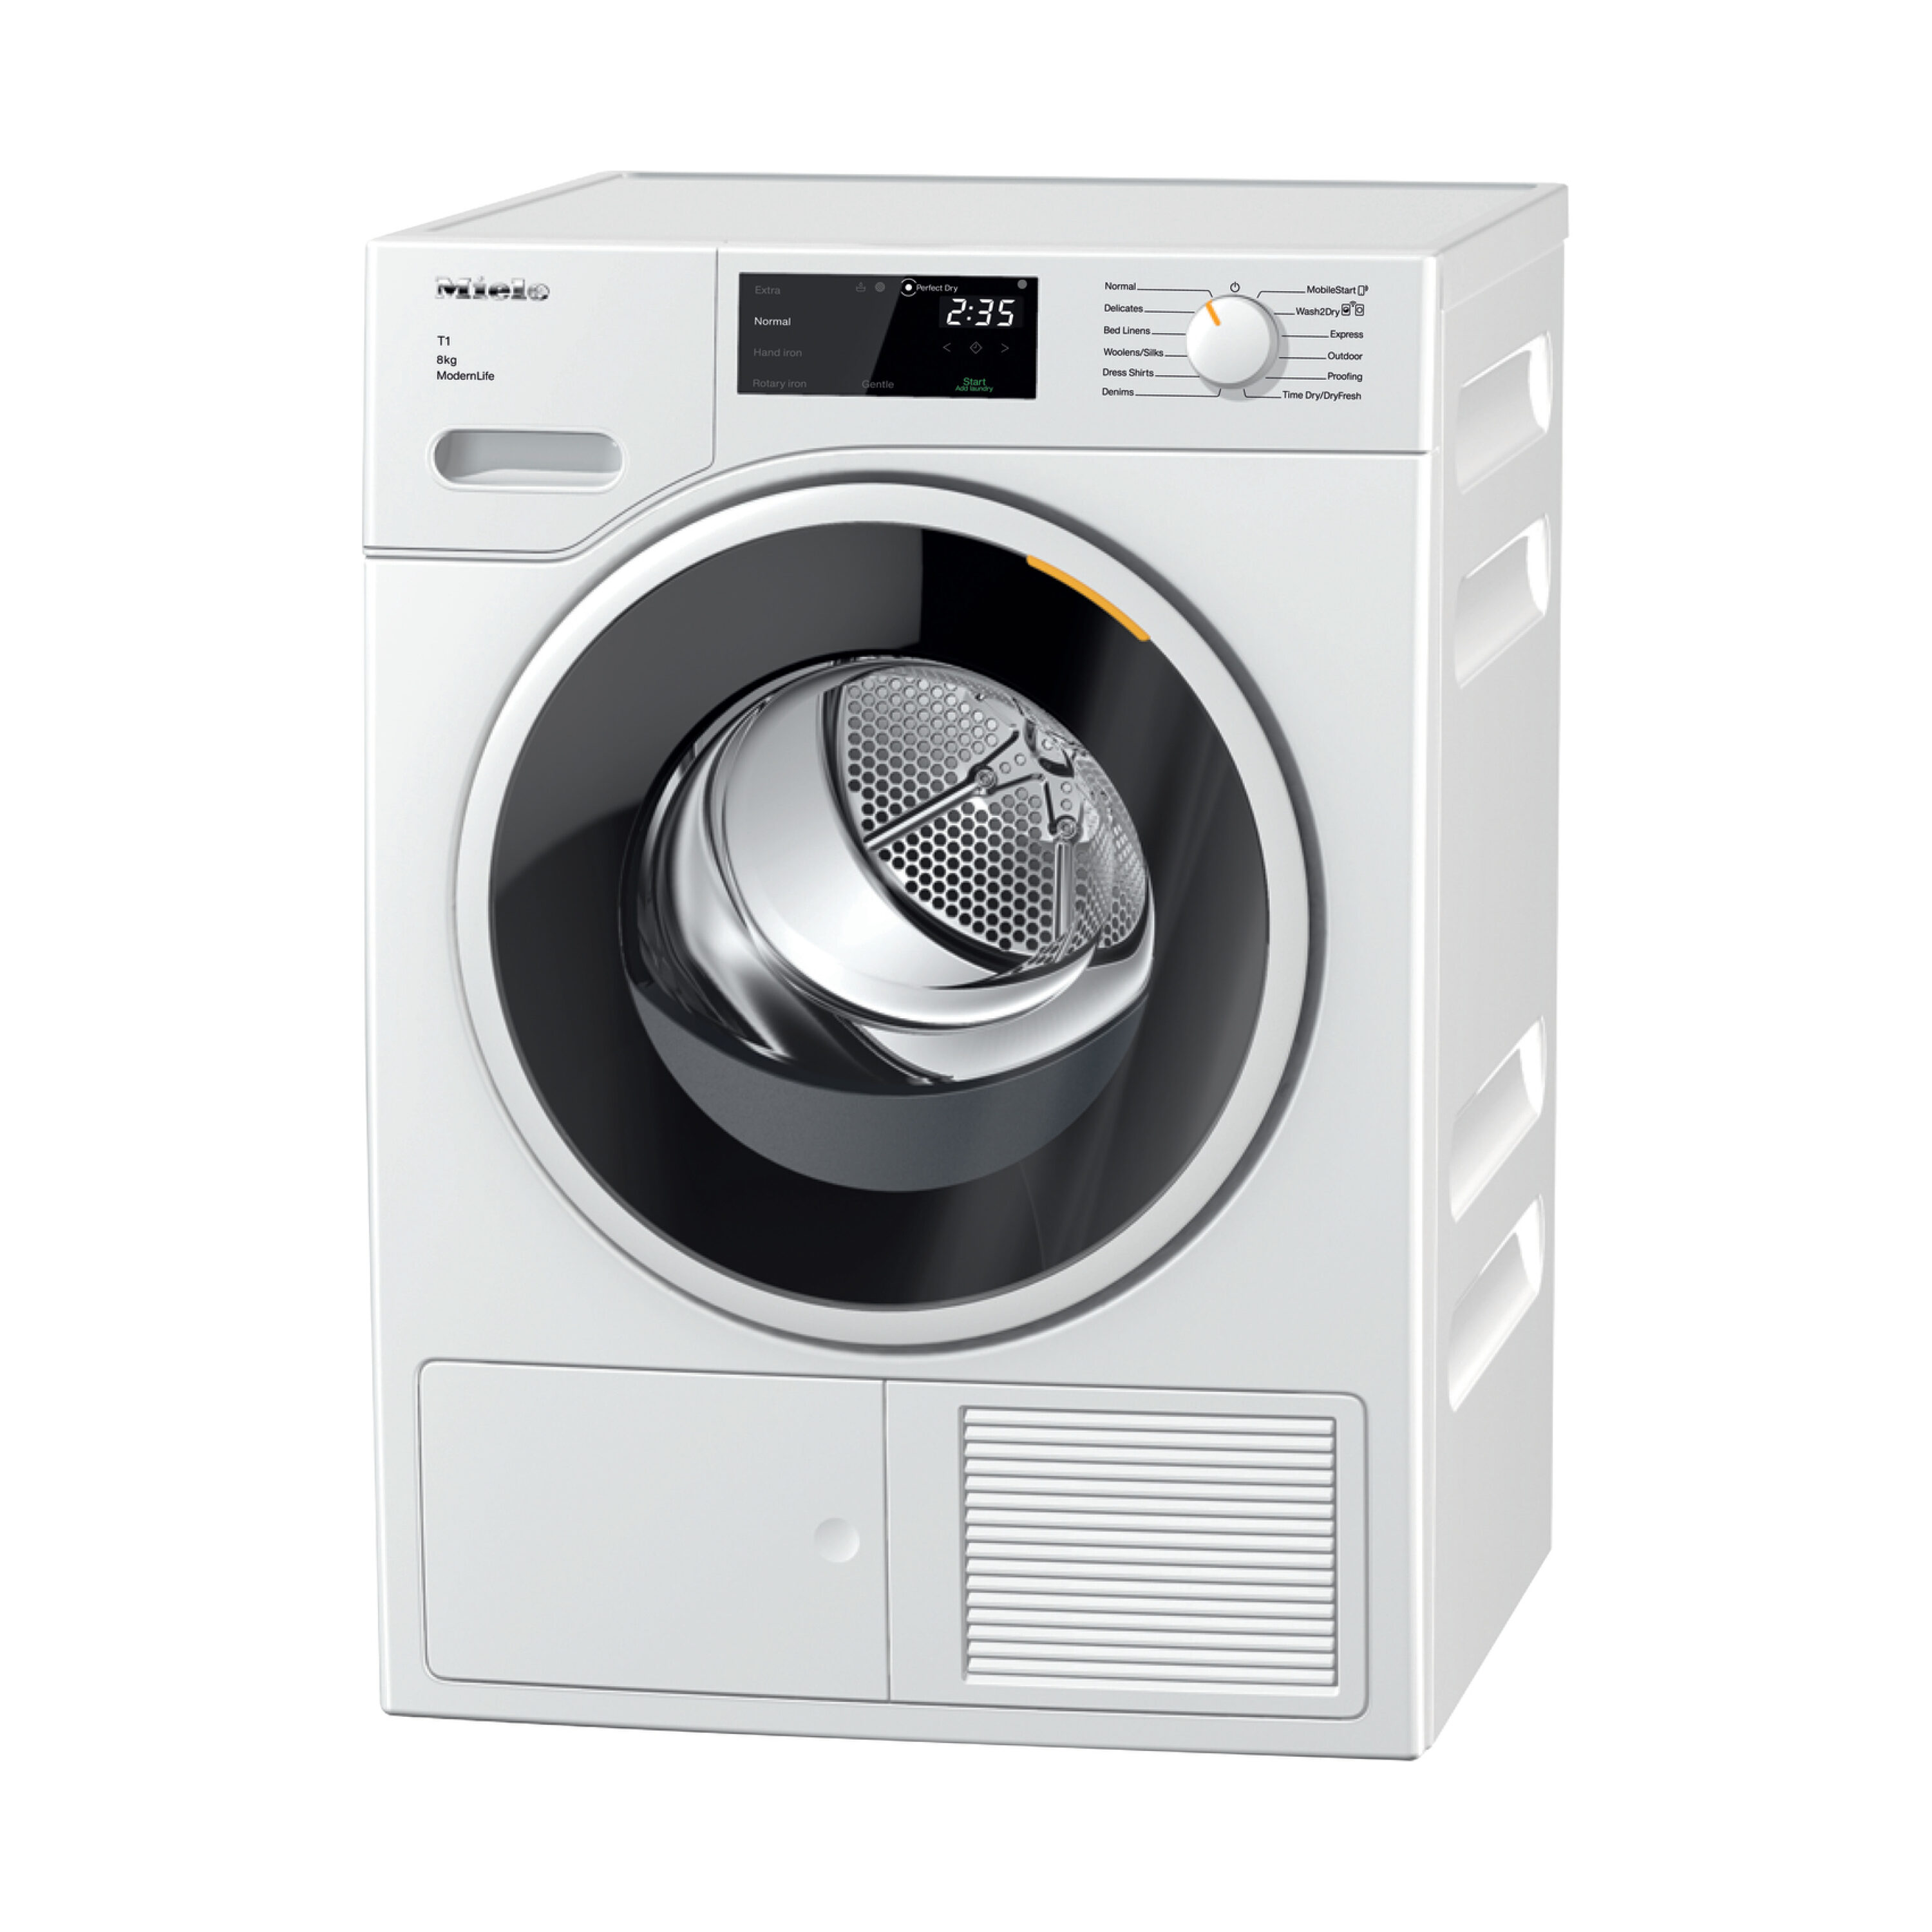 Nadeel hebzuchtig Ban Miele Washers & Dryers at Lowes.com